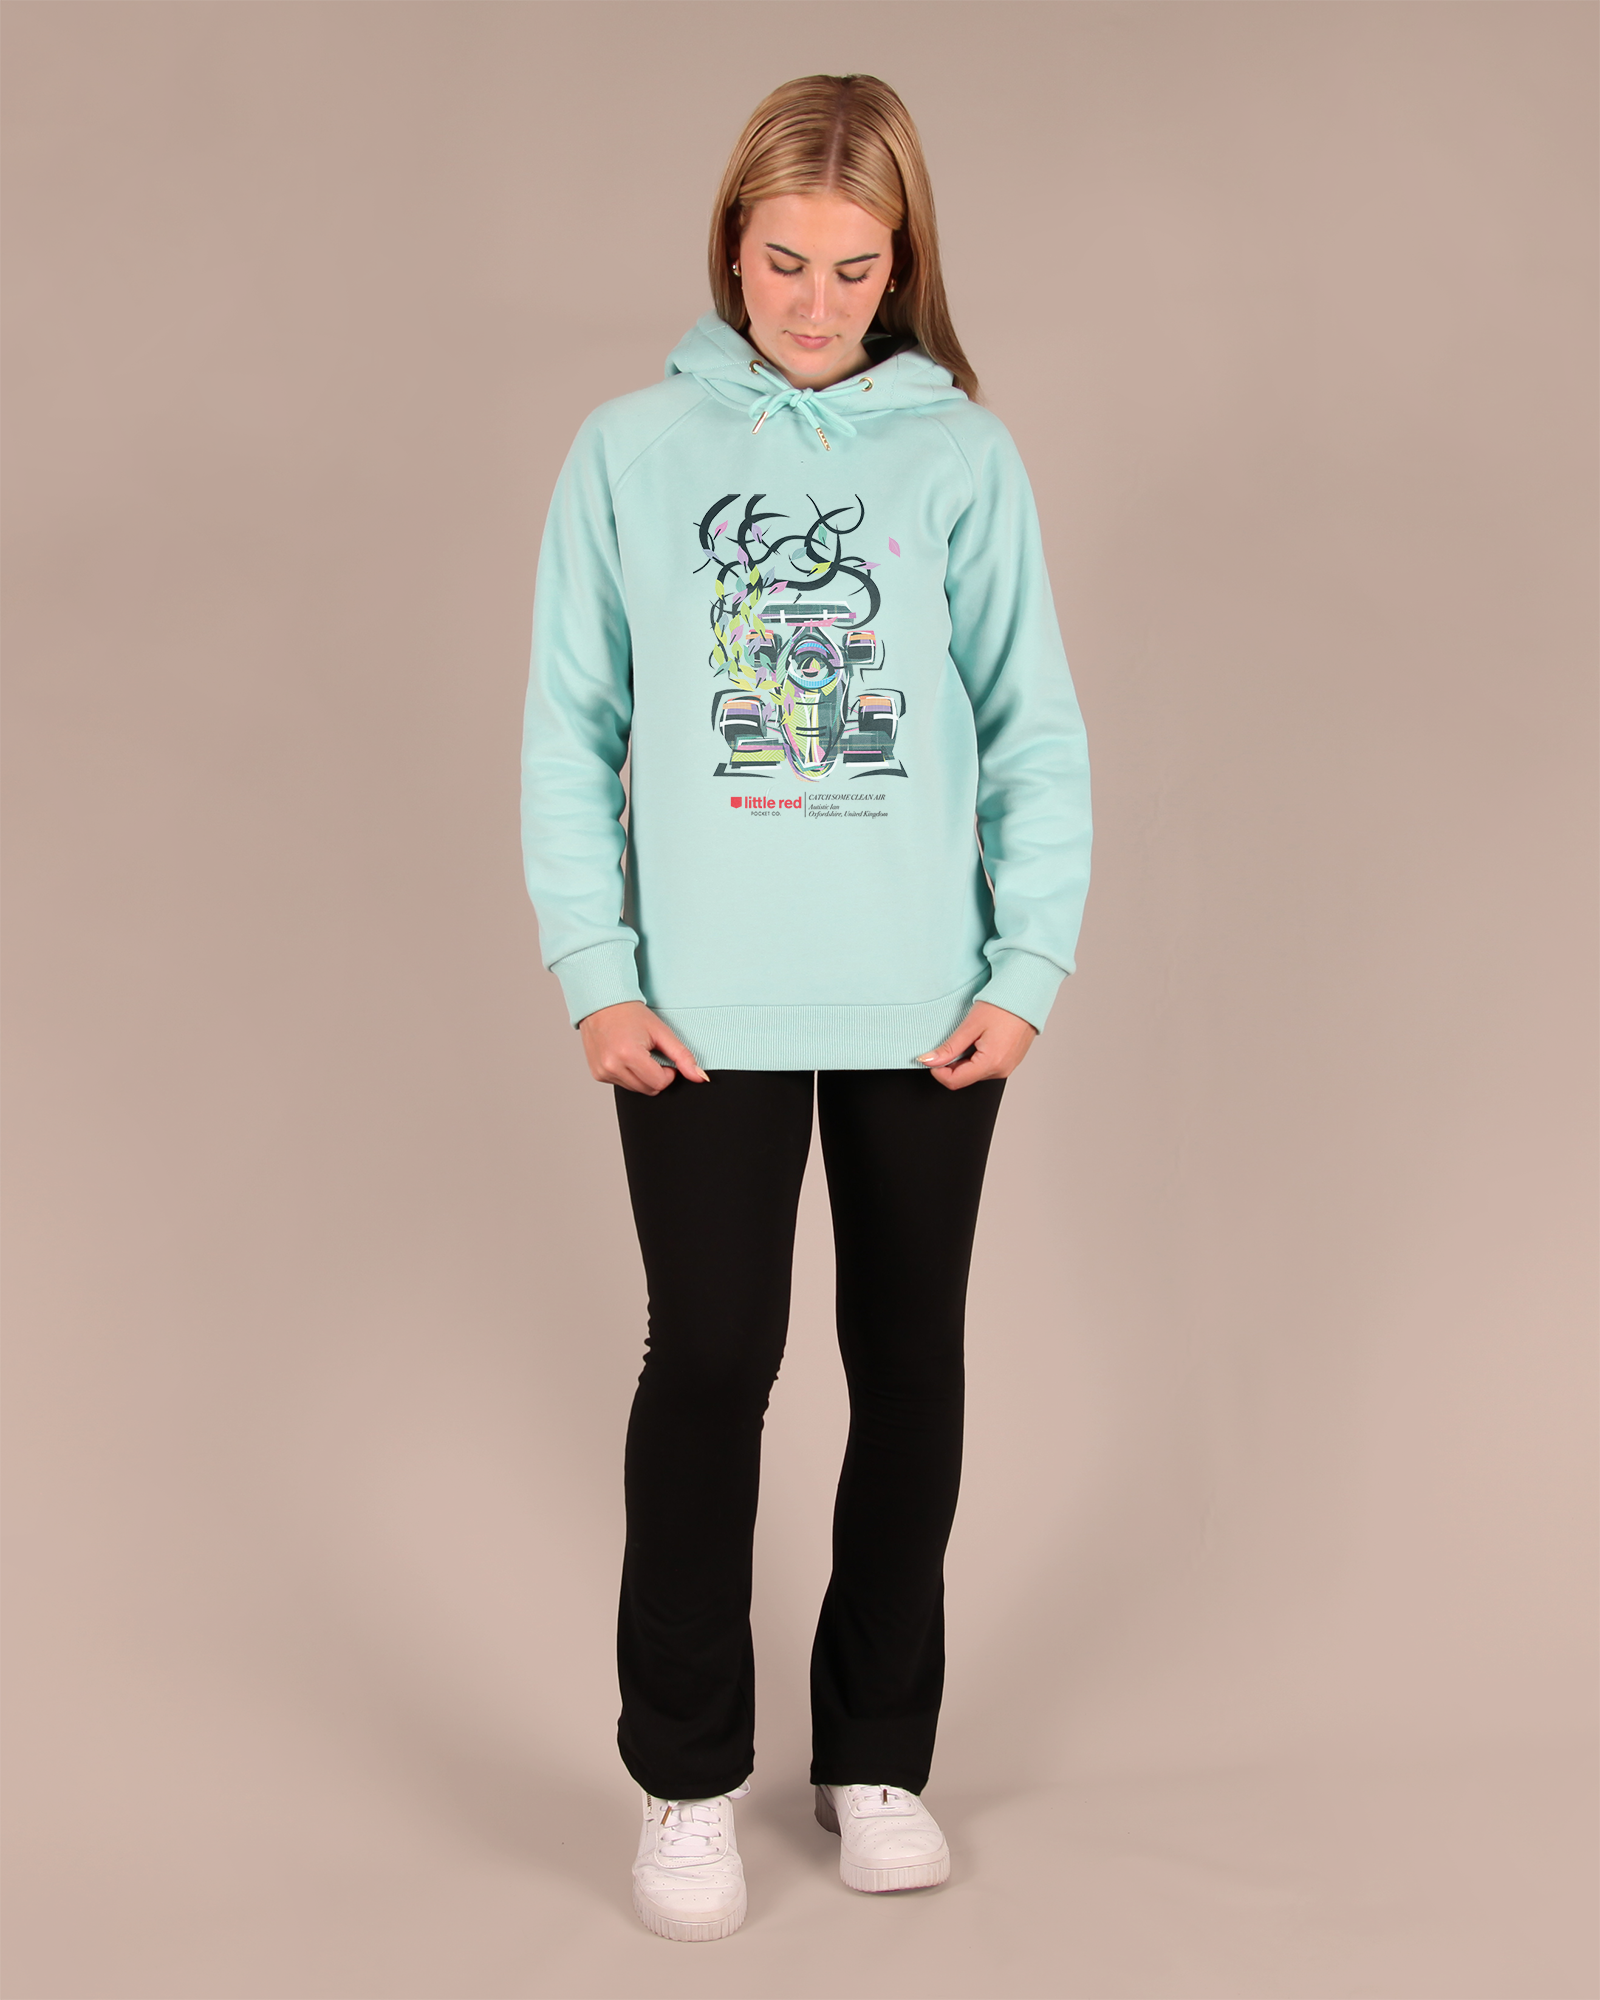 "Catch Some Clean Air" Female Hoodie - Turquoise